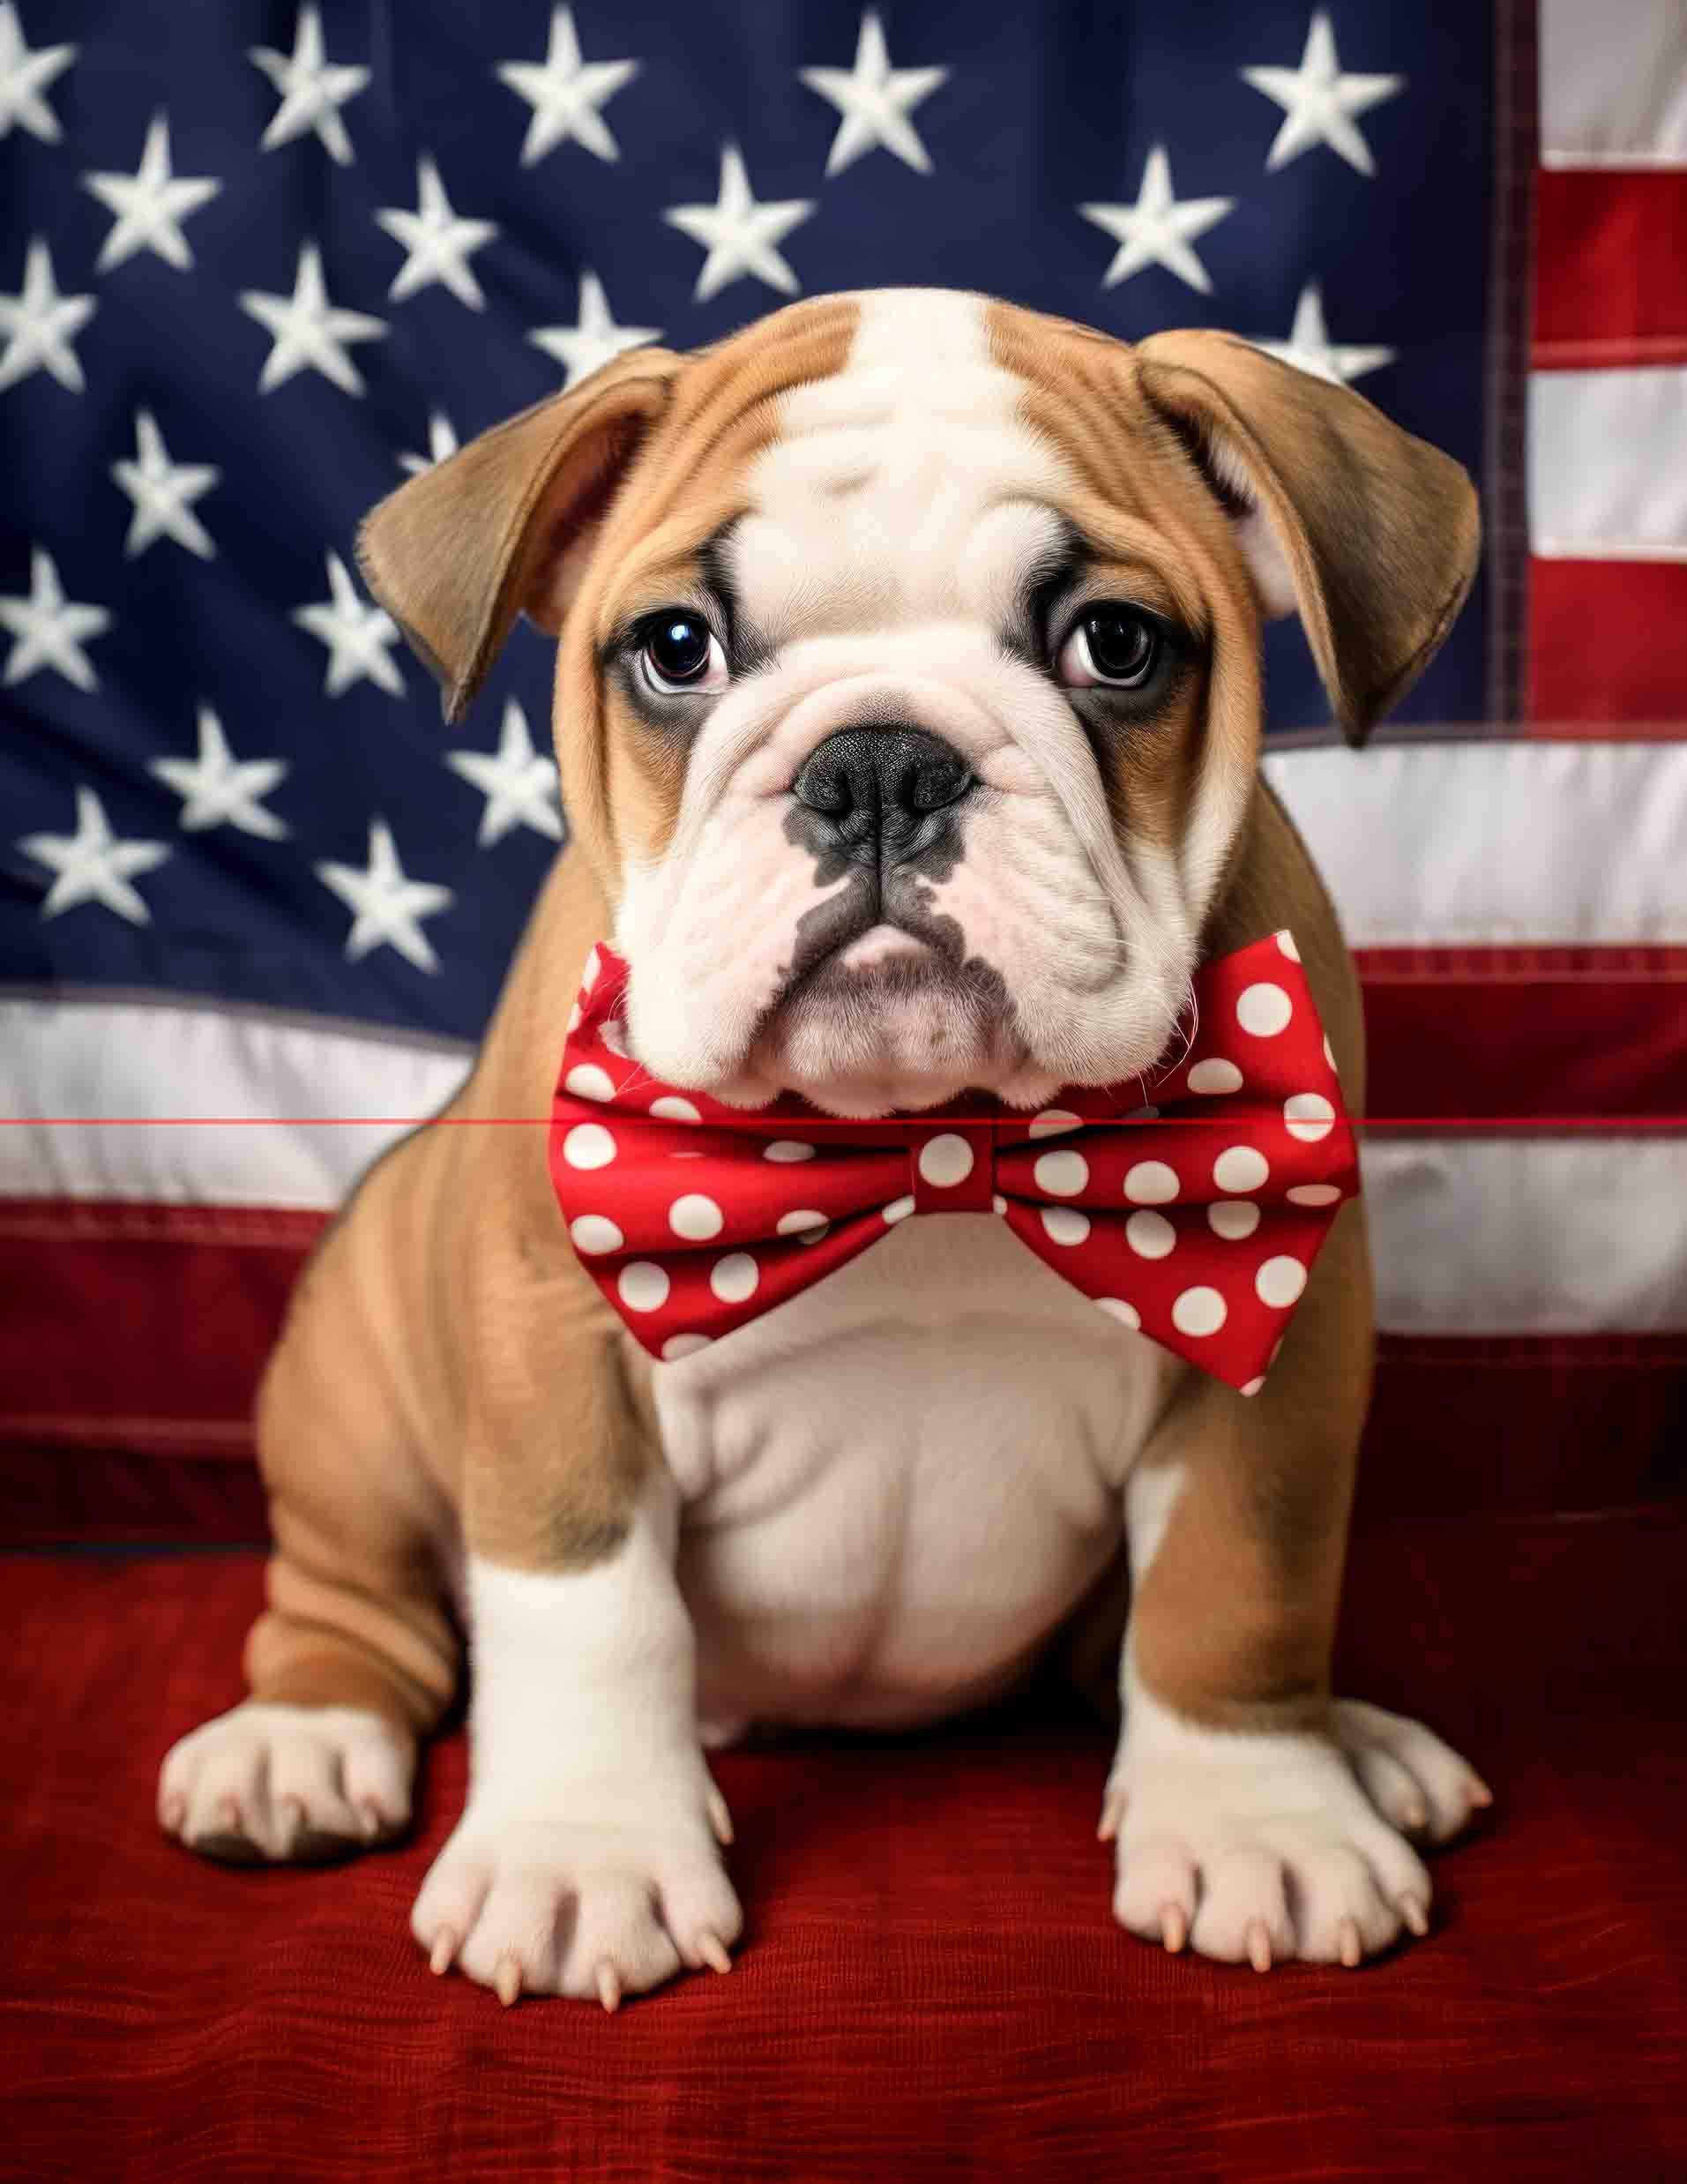 A cute english bulldog puppy sits in front of an american flag, wearing a large red bow tie with white polka dots. the puppy has a wrinkled, expressive face and looks directly at the viewer.